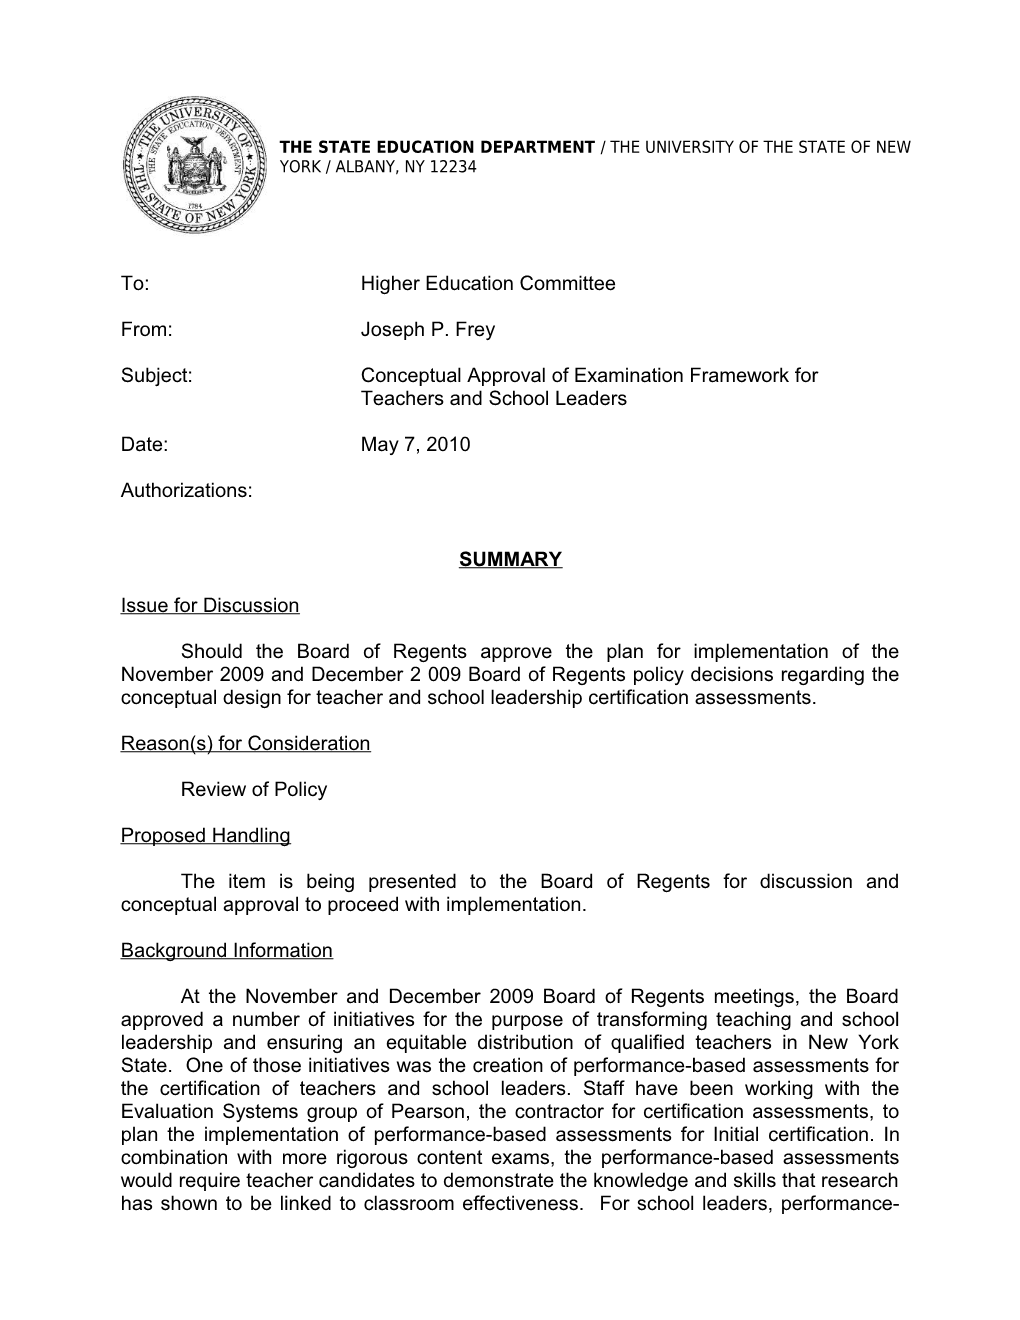 Subject:Conceptual Approval of Examination Framework for Teachers and School Leaders